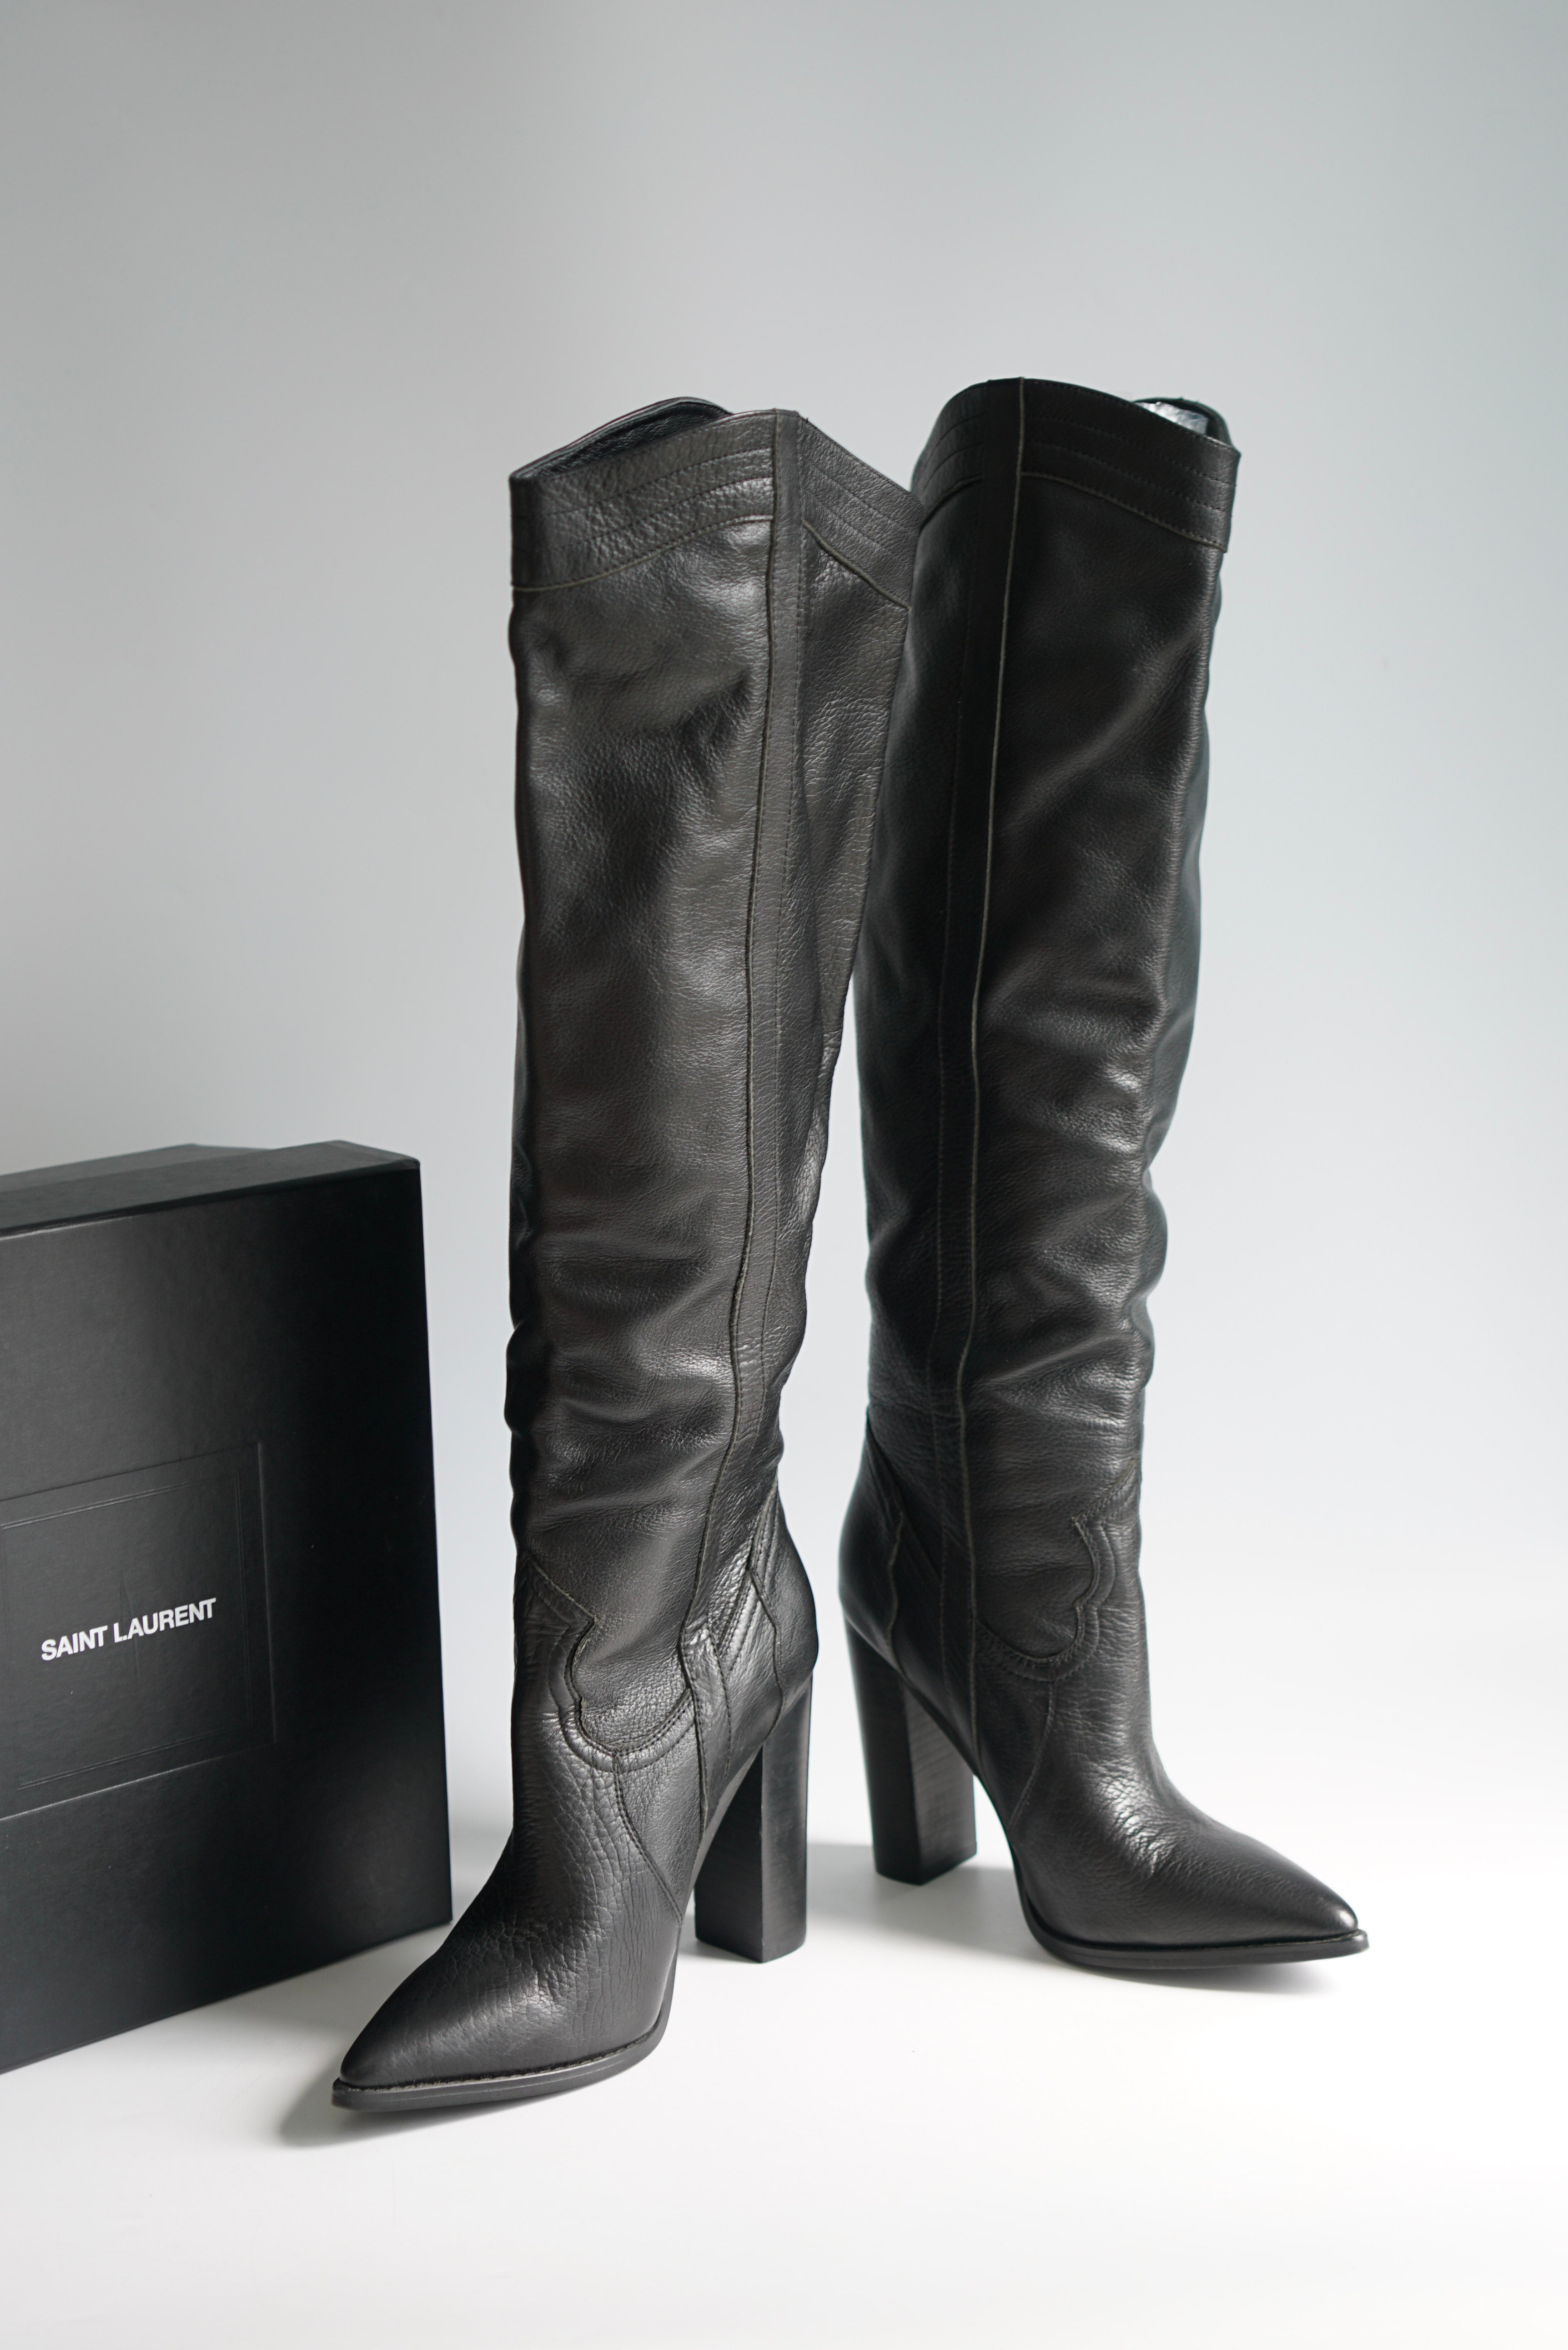 YSL Black Leather Knee-Length Boots with Heels Size 38 EUR | Purse Maison Luxury Bags Shop